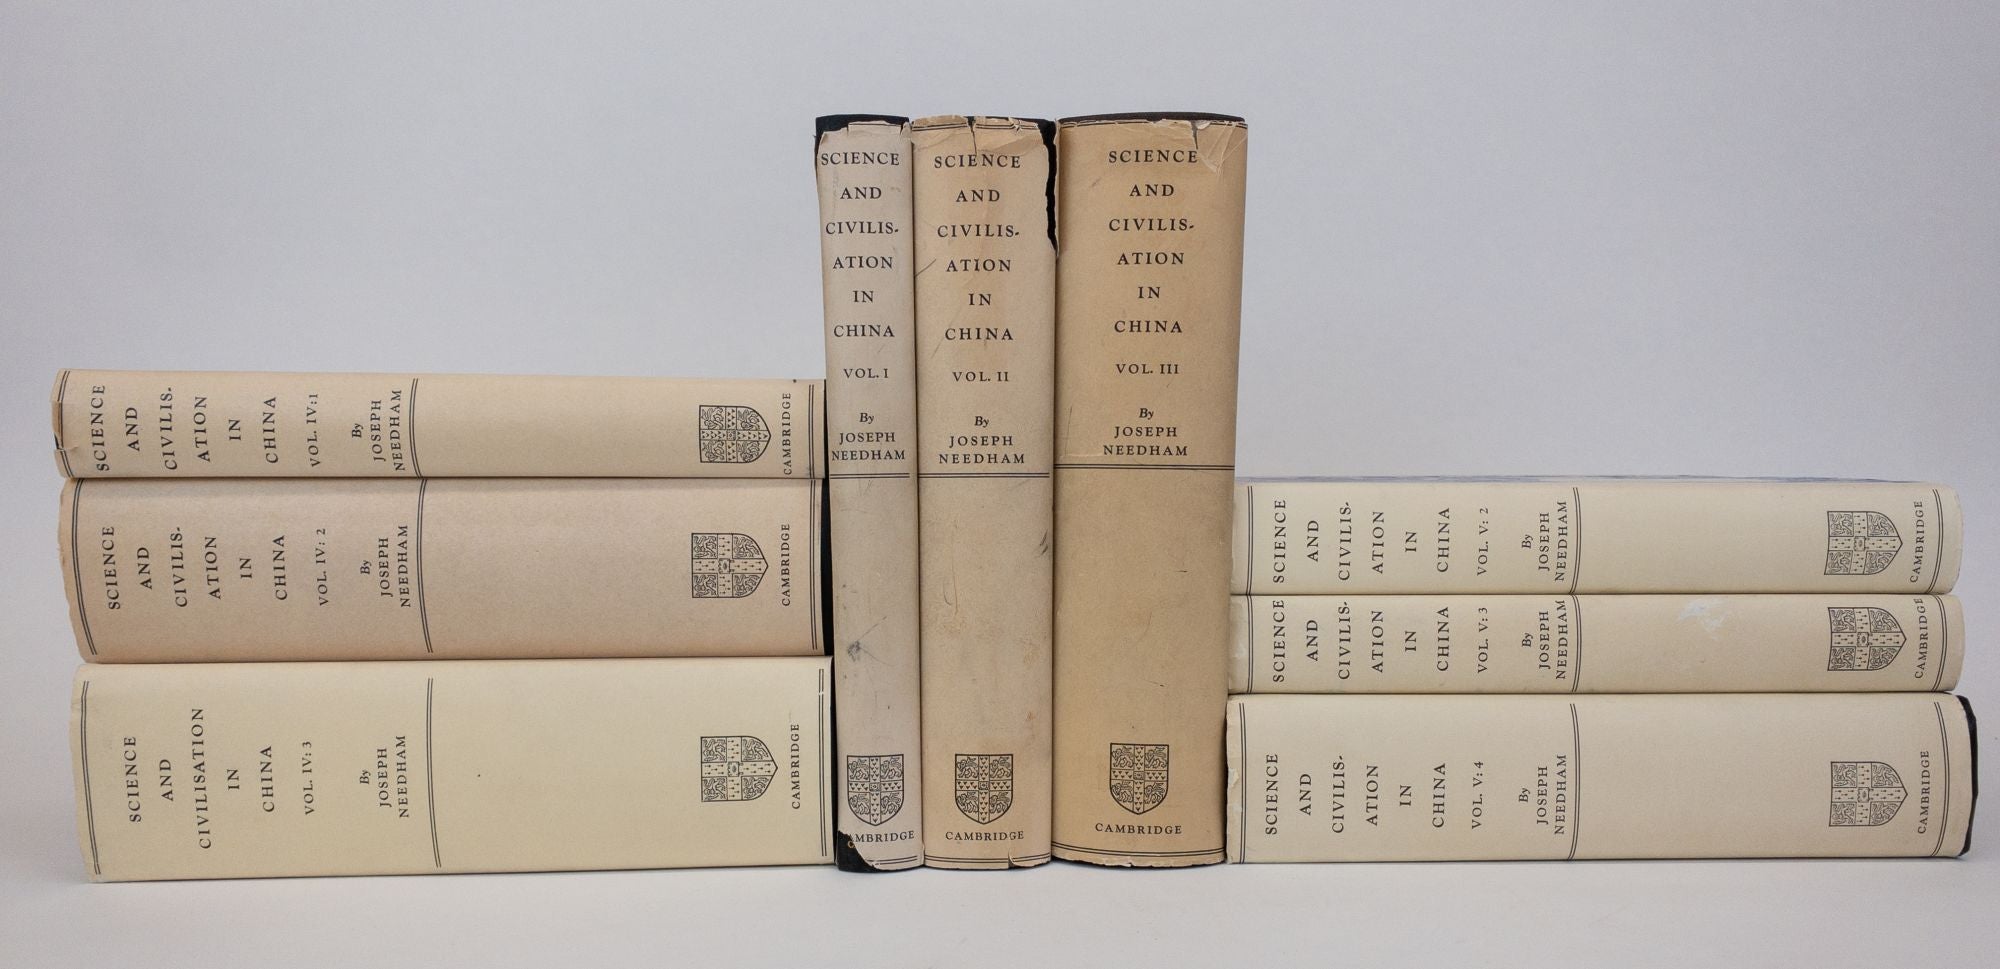 Product Image for SCIENCE & CIVILISATION IN CHINA [Nine Volumes Only]